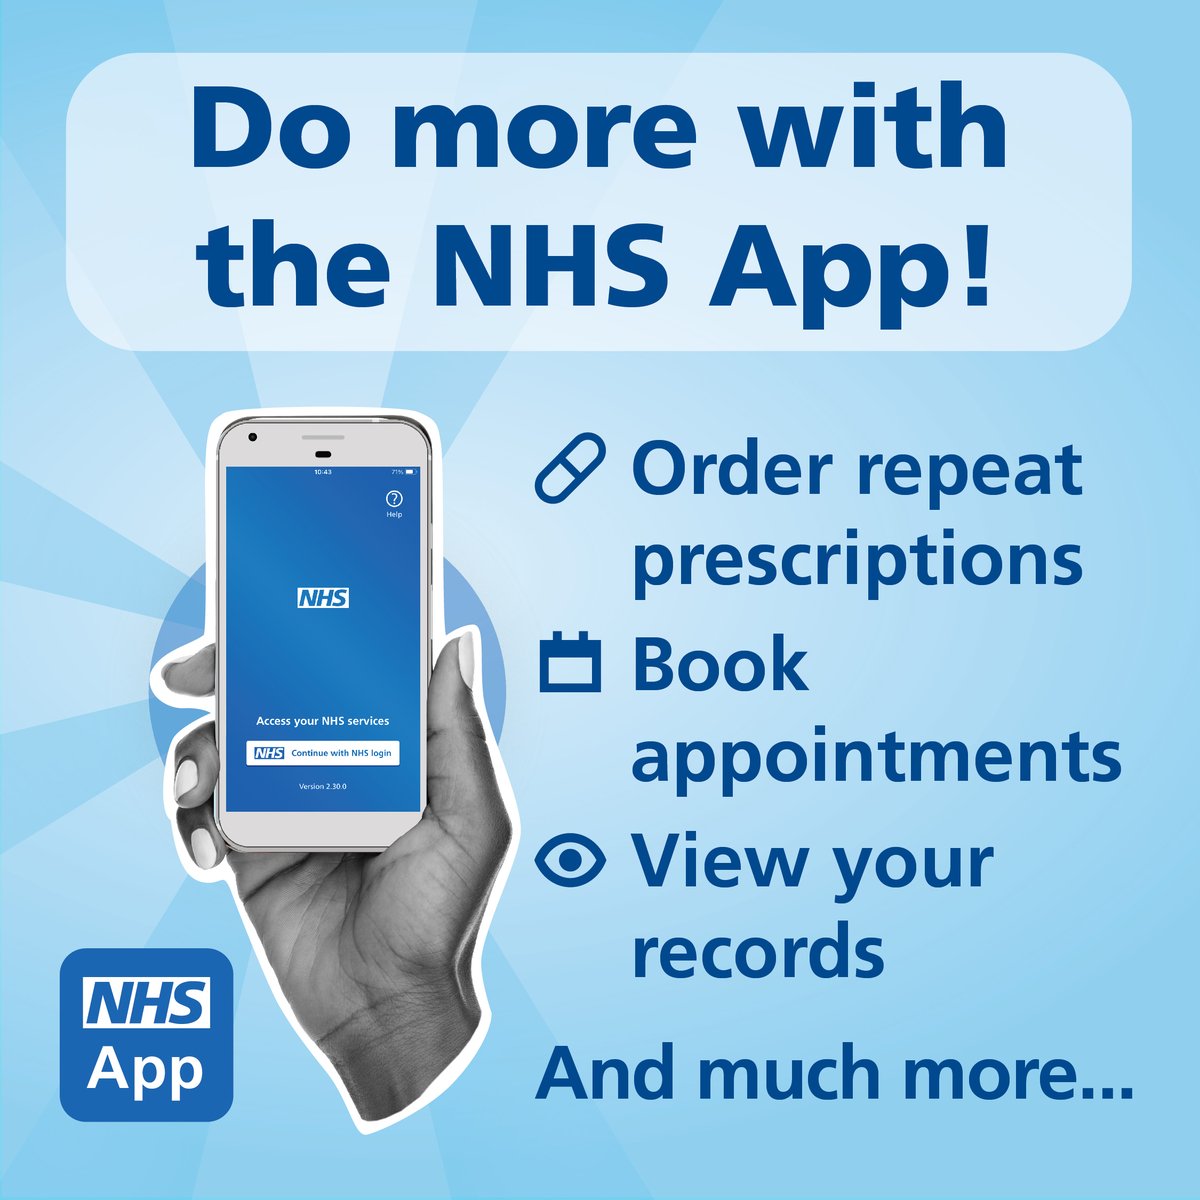 As the #bankholiday weekend approaches, please note that GP practices will be closed on Monday, 6th May.

Ensure you have enough medications—order repeat prescriptions via the #NHSApp. It’s quick & easy!📱

Check out this tutorial for help:
youtube.com/watch?v=8Hsk_g…